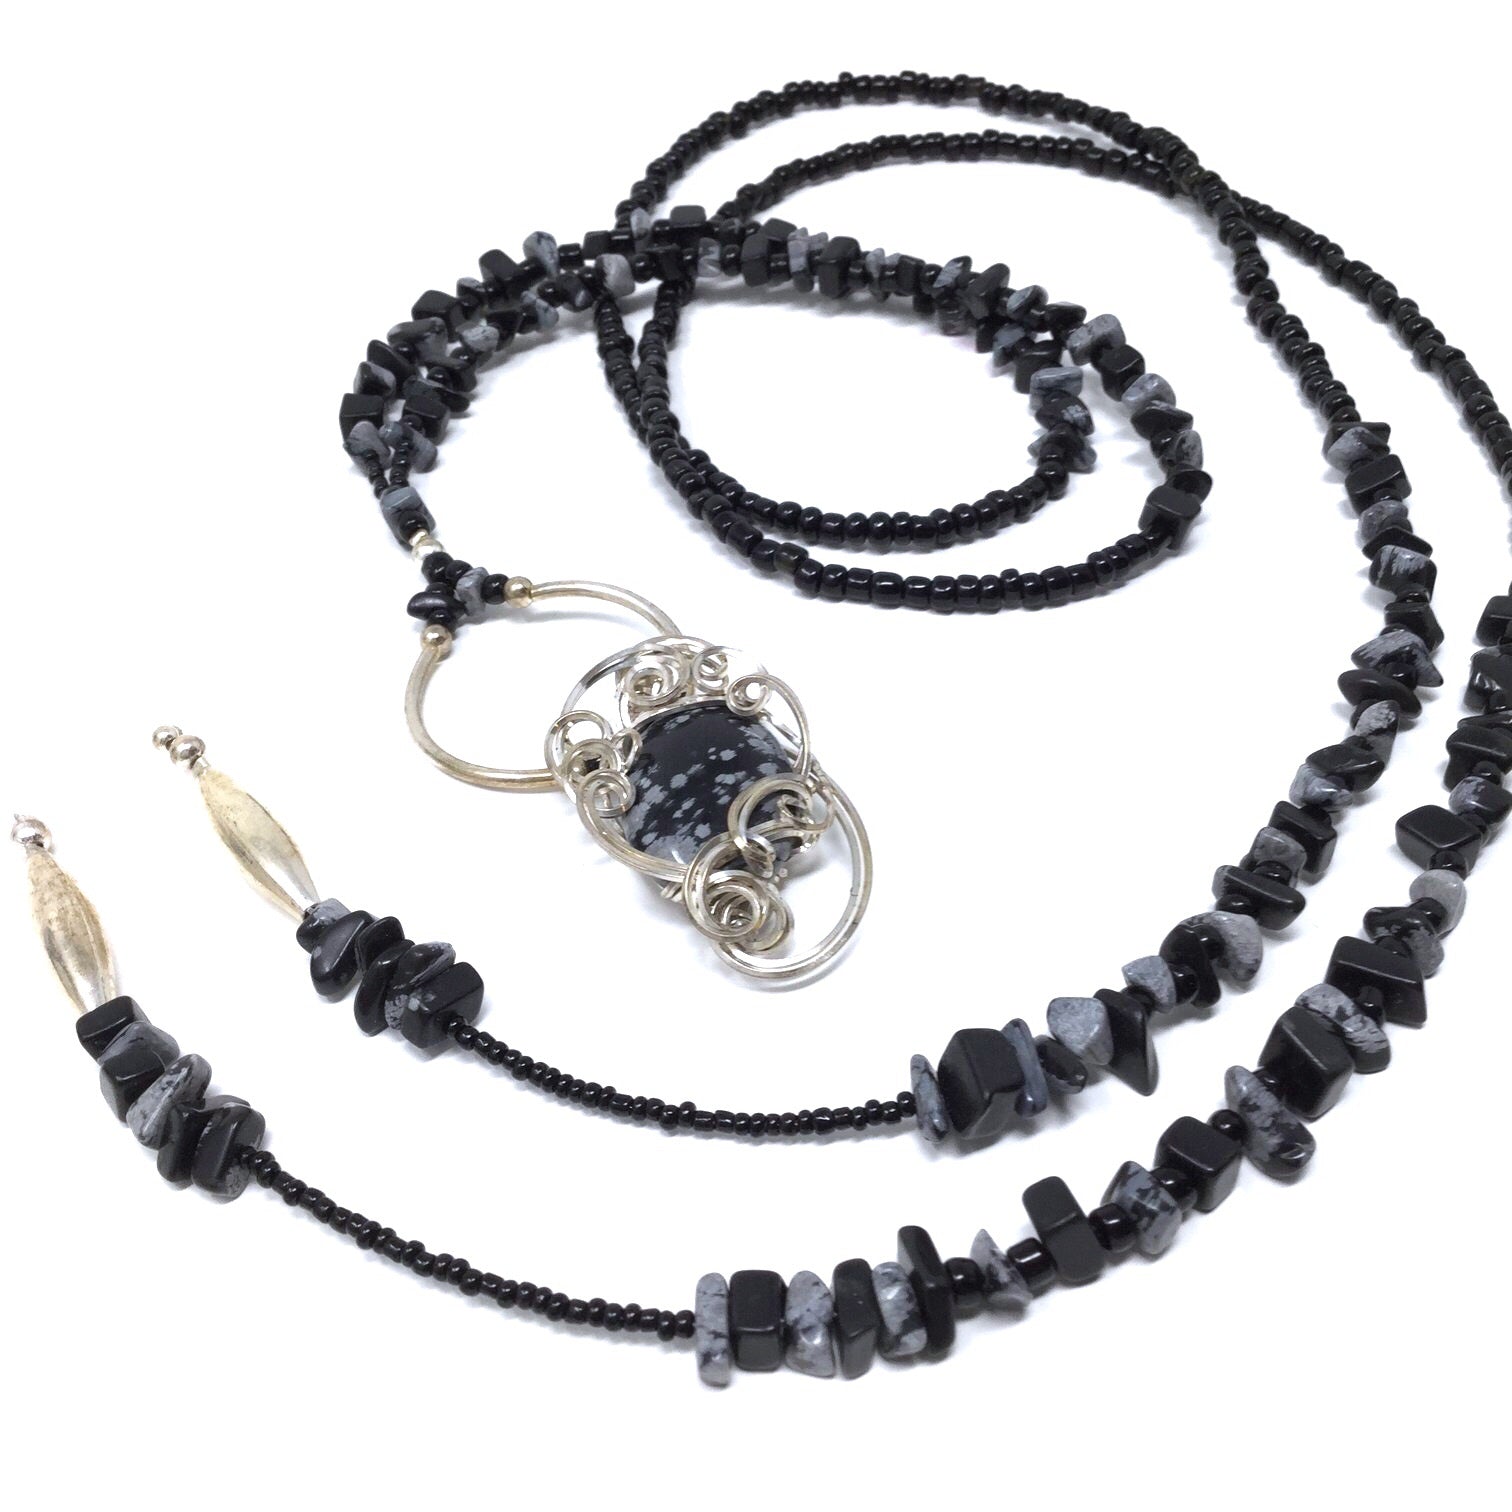 Amazon.com: Obsidian Wolf Necklace for Men, Natural Healing Crystal Mens Beaded  Necklace, Black Obsidian Tigers Eye and Hematite Energy Stone Amulet  Protection Necklaces Jewelry Gift for Graduation Father's Day : Handmade  Products